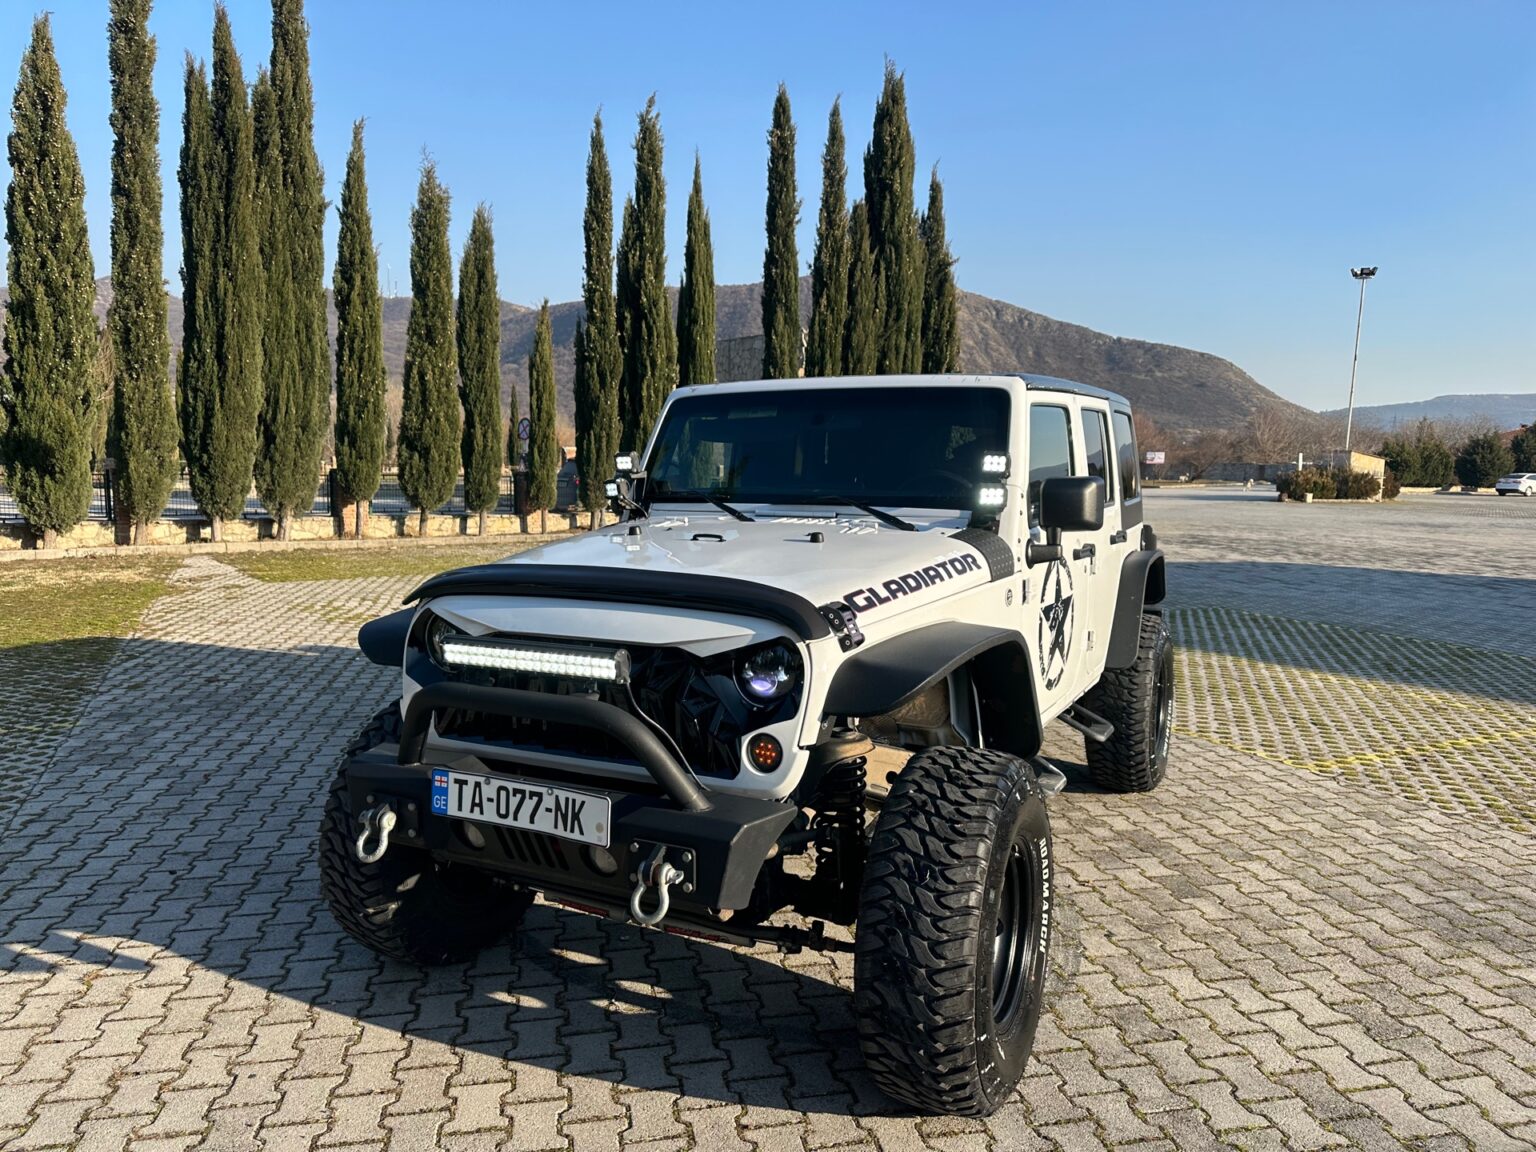 Off-road rental Georgia - Jeep Wrangler SUV for rent in Tbilisi and Tbilisi Airport